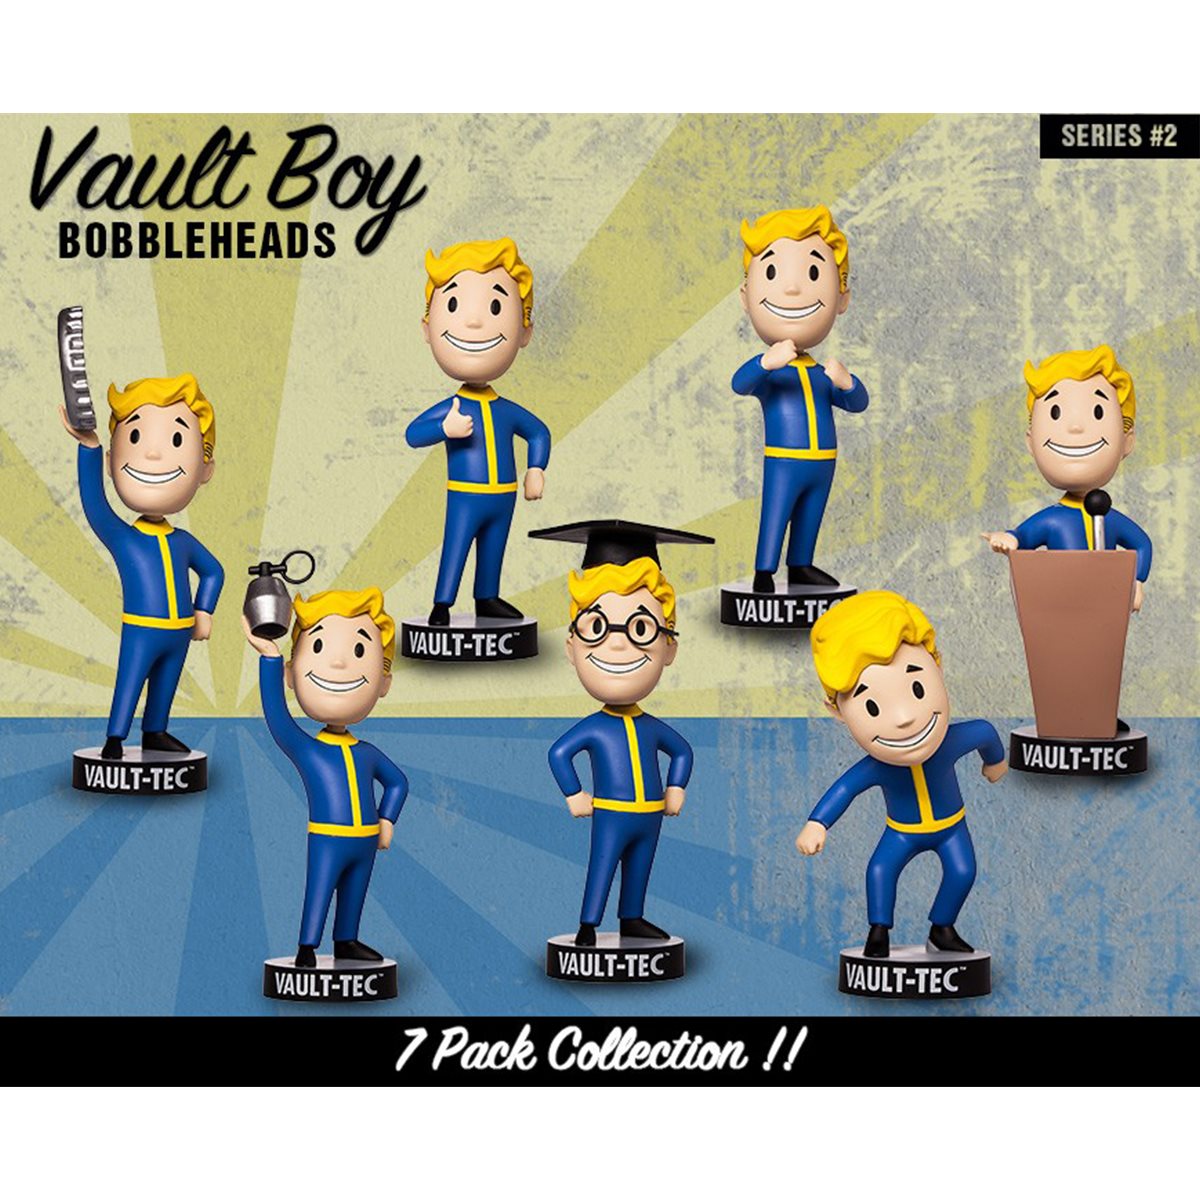 Bobbleheads fallout 4 what do they do фото 2